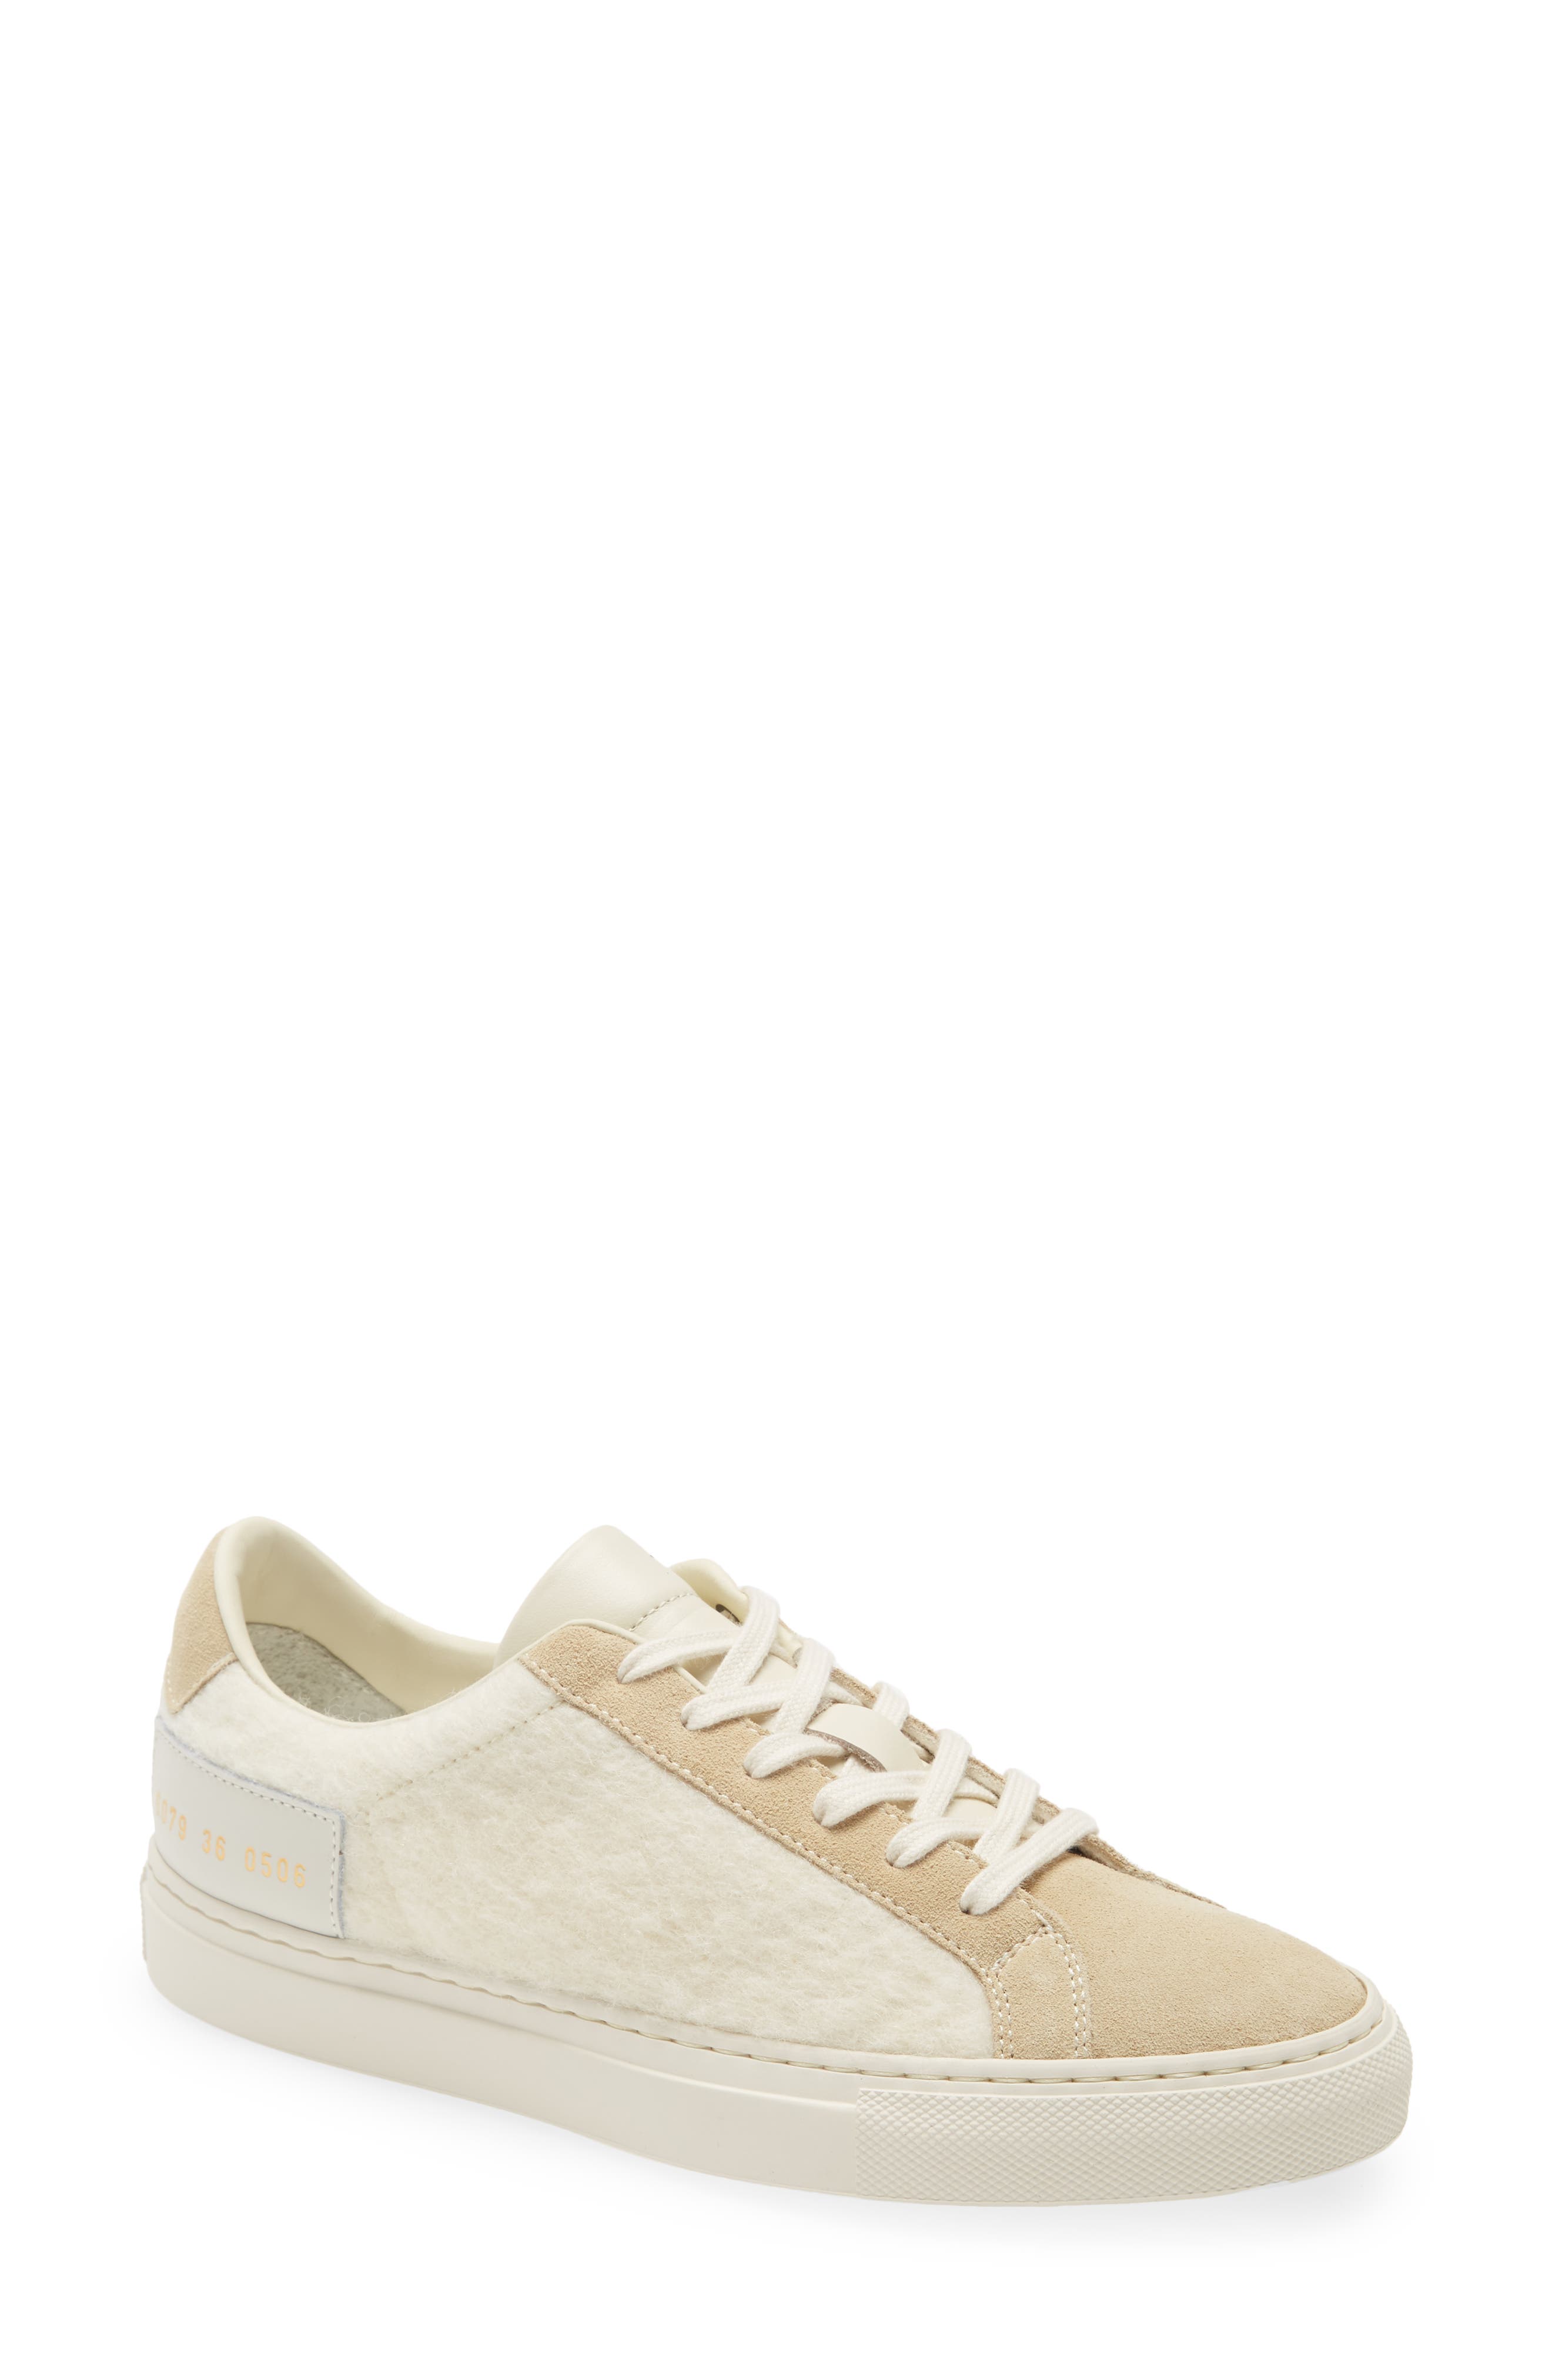 Common Projects Retro Mixed Media Low Top Sneaker in White at Nordstrom, Size 9Us